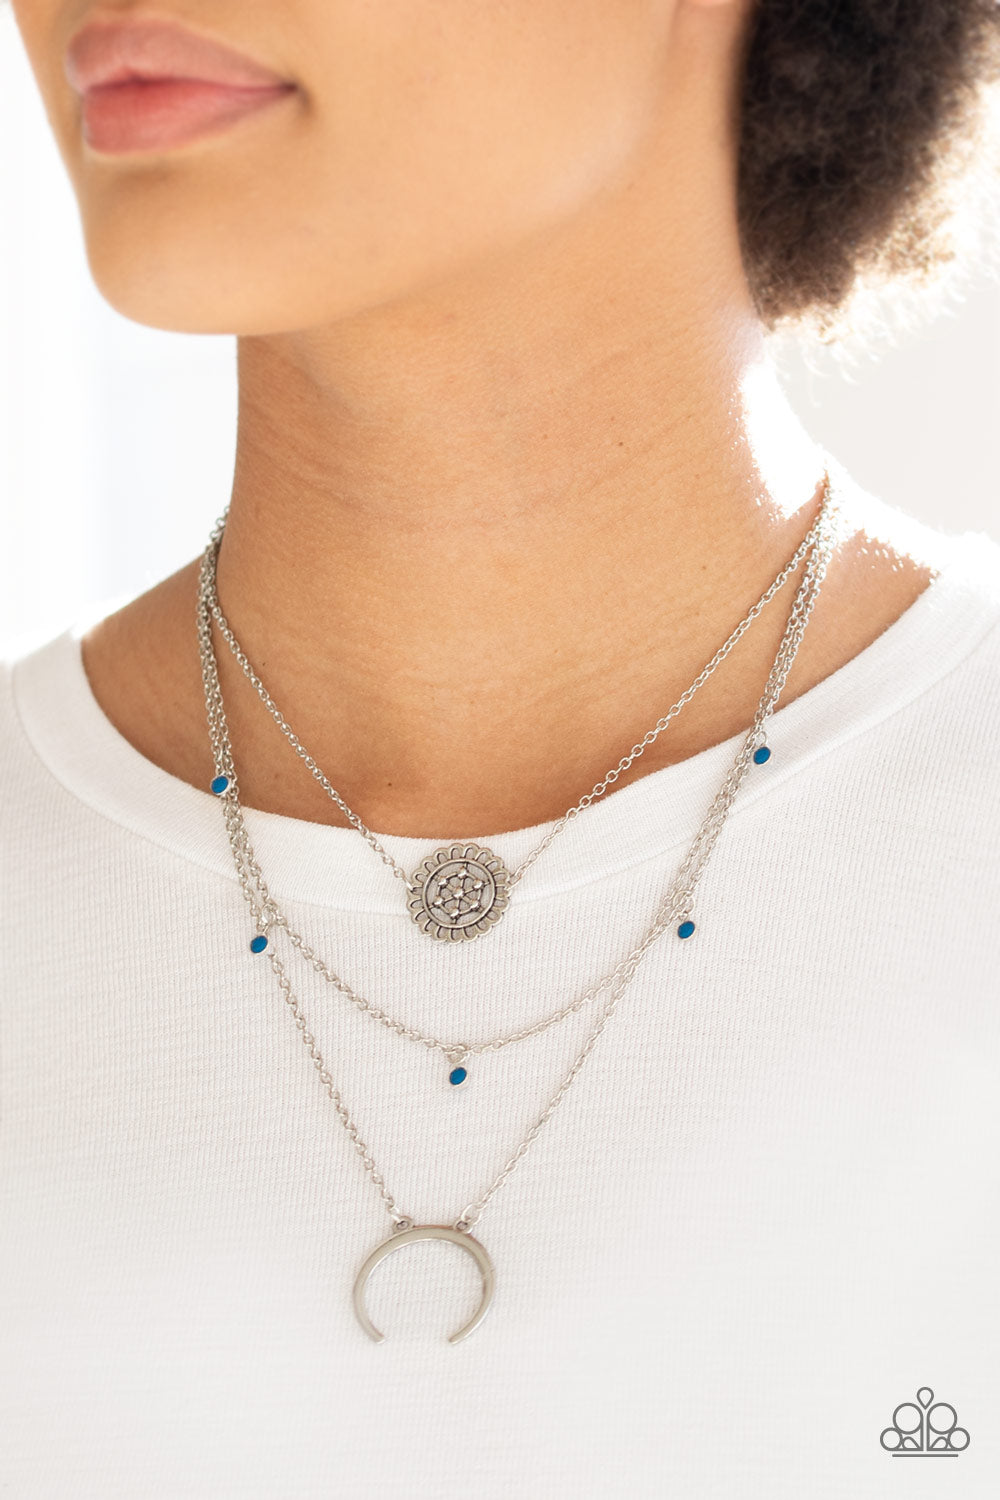 Lunar Lotus- Blue and Silver Necklace- Paparazzi Accessories